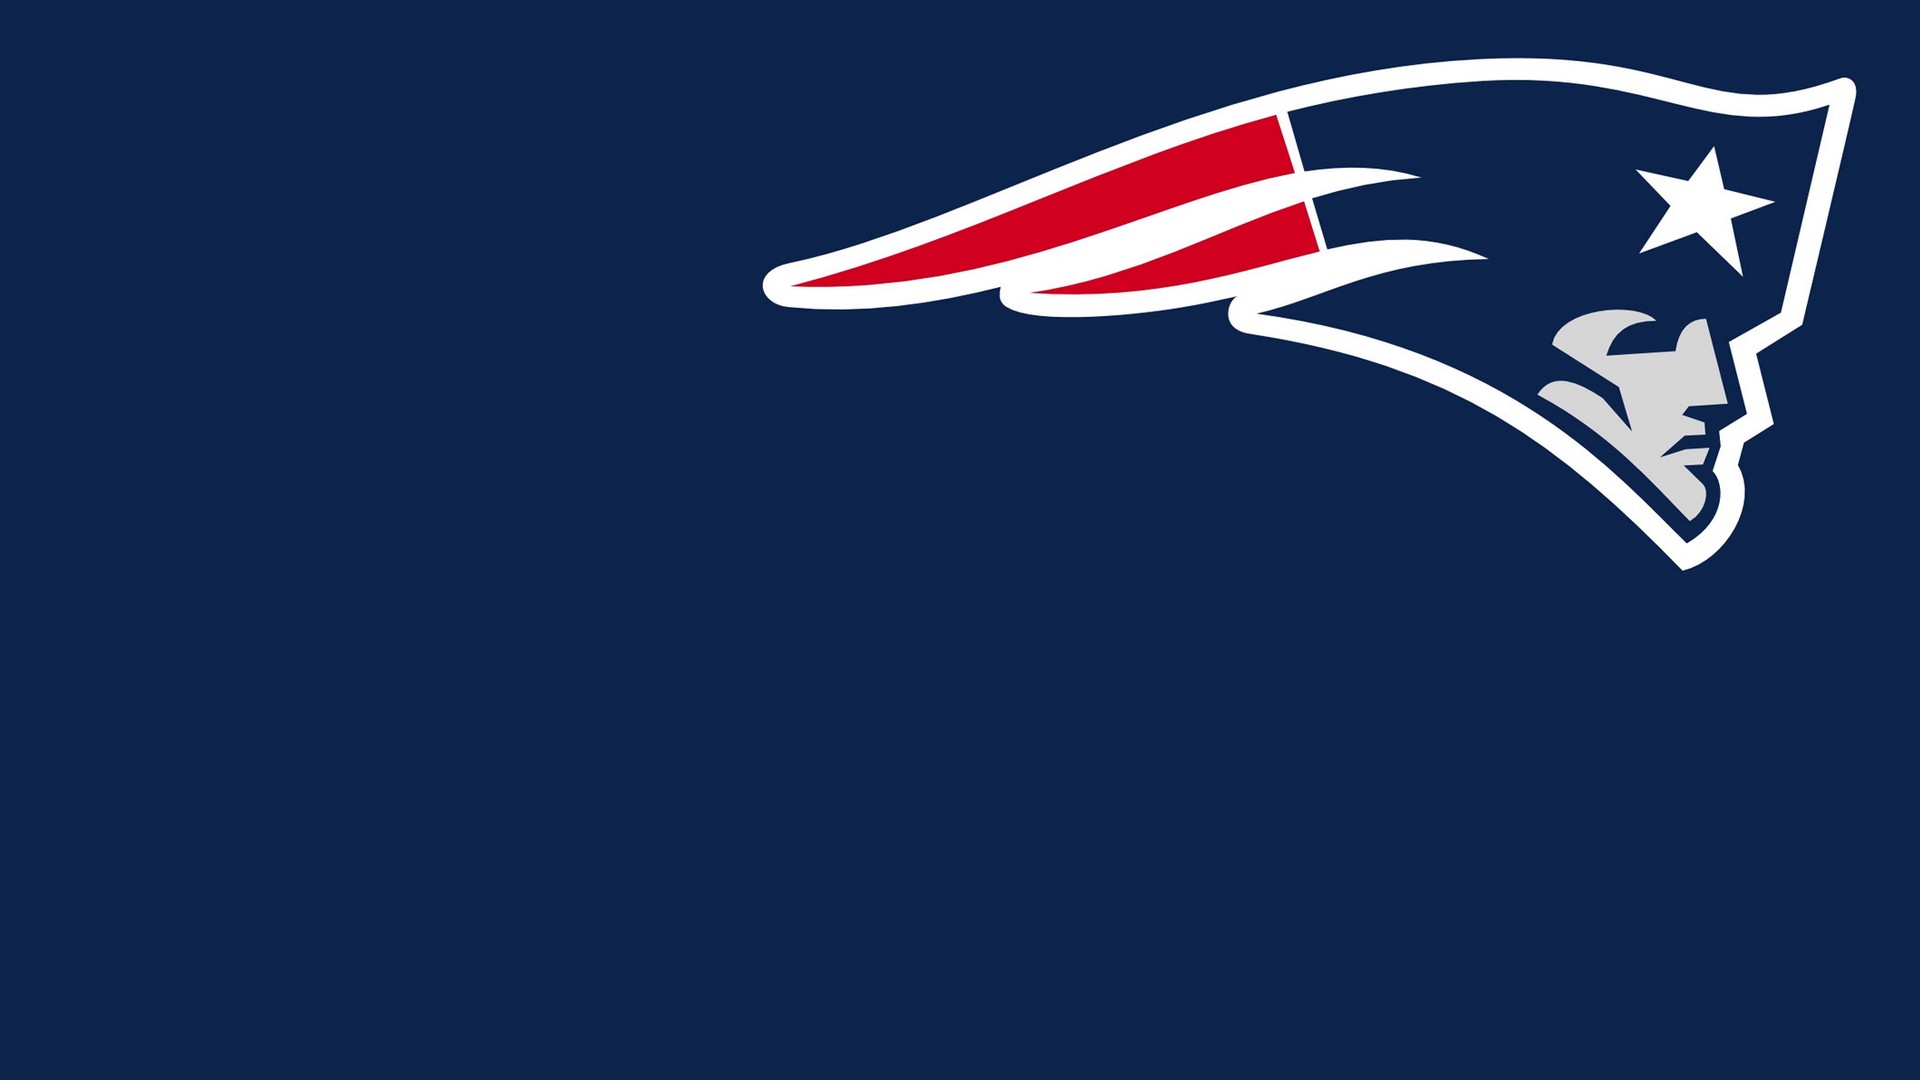 New England Patriots NFL Wallpaper for Computer With high-resolution 1920X1080 pixel. Download and set as wallpaper for Desktop Computer, Apple iPhone X, XS Max, XR, 8, 7, 6, SE, iPad, Android